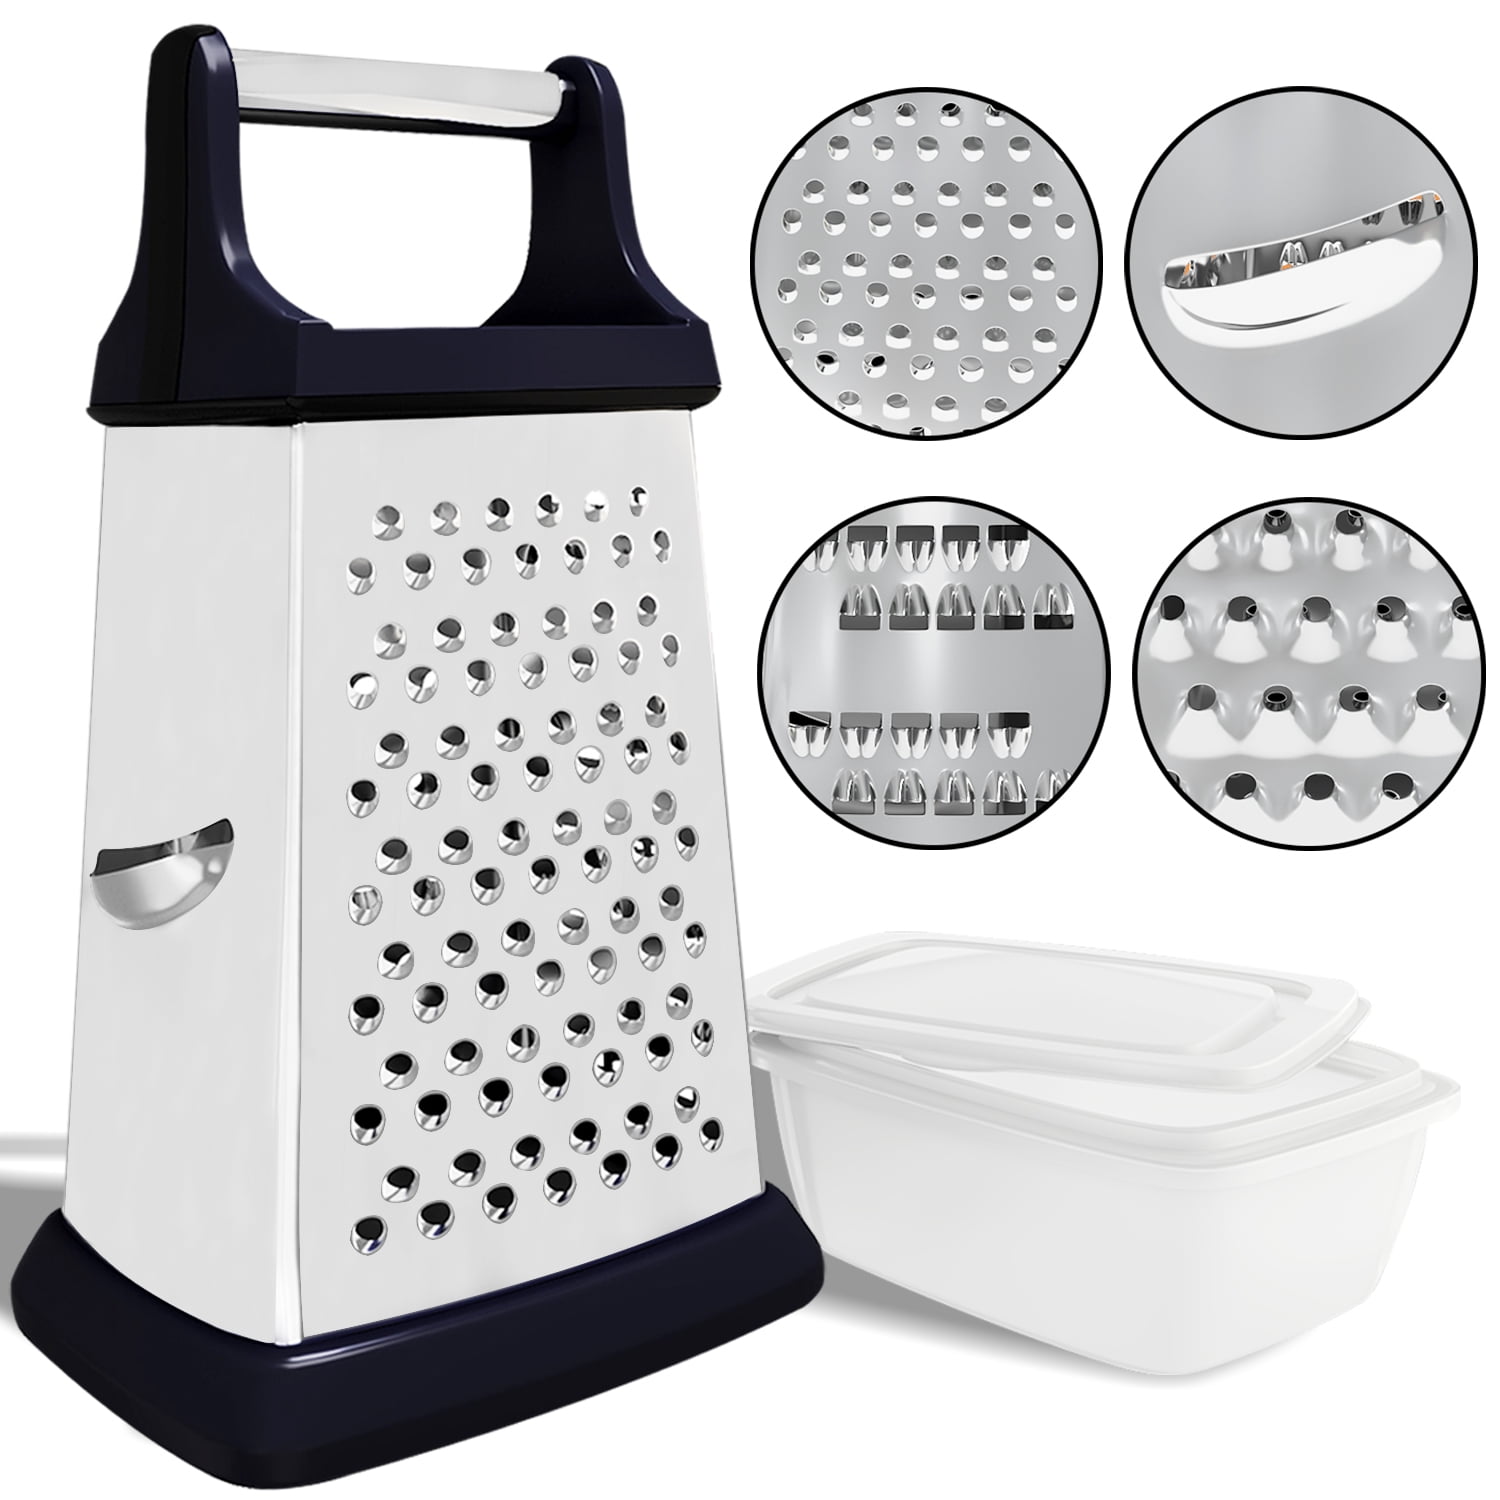 Blade 4 Side Stainless Steel Box Grater Slicer For Cheese Zest with Razor Sharp Blades 